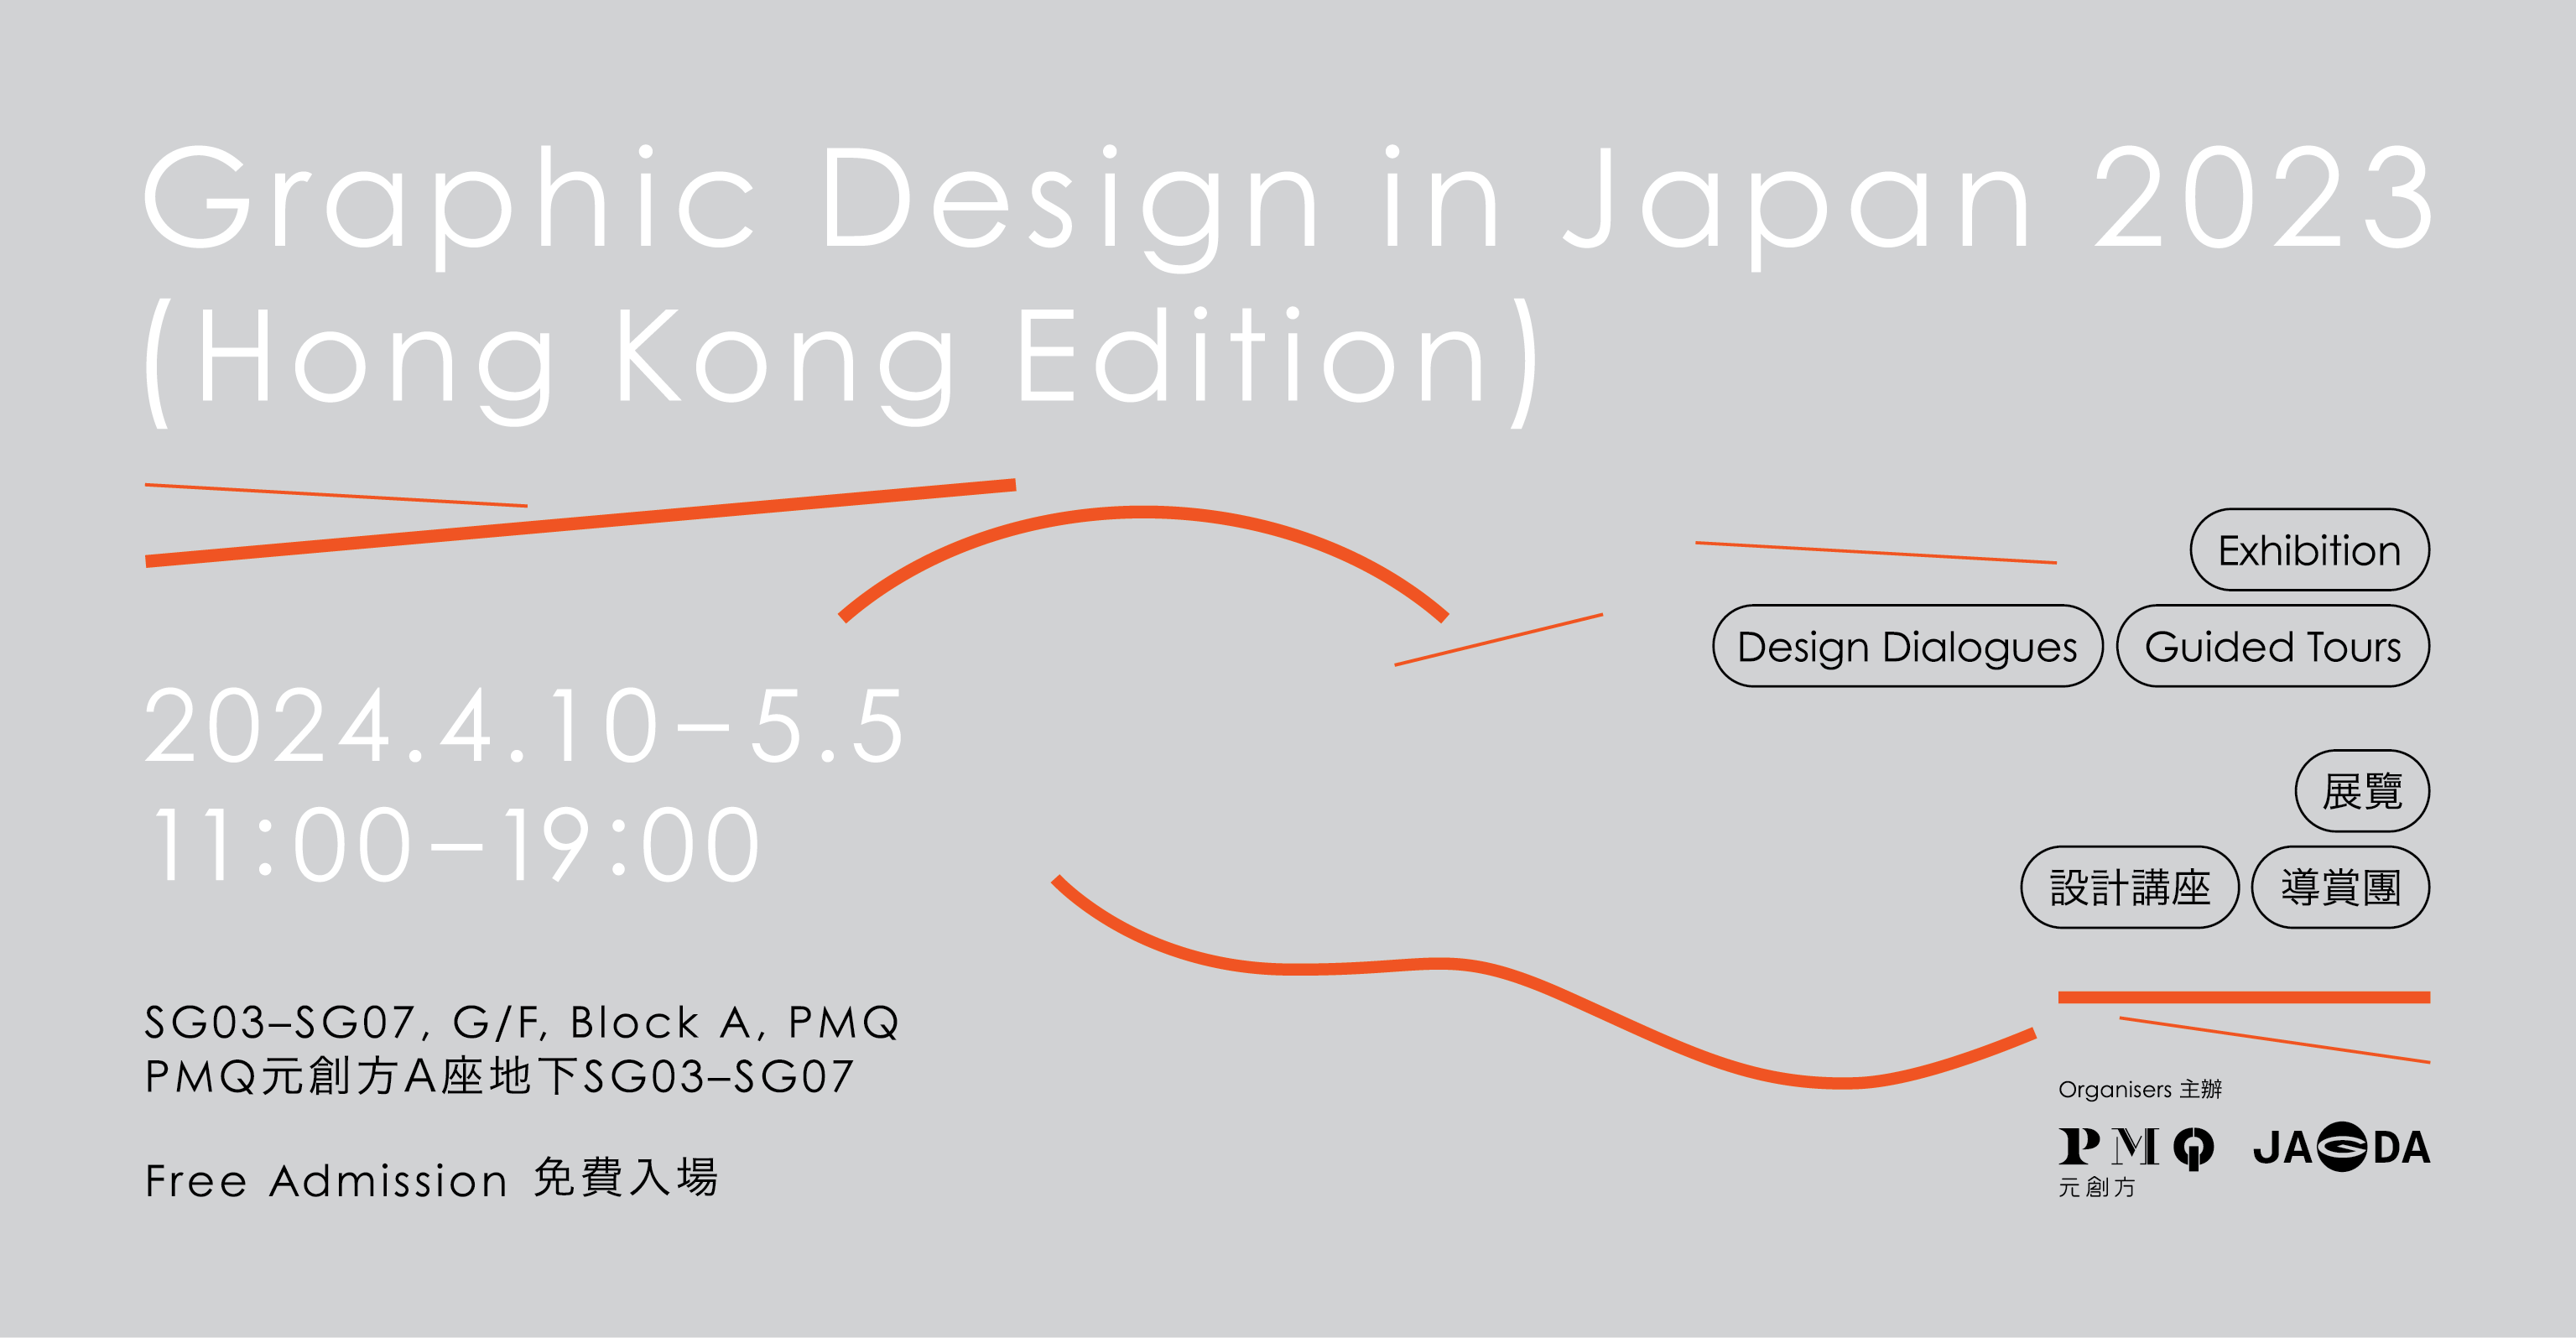 Supporting Event - Graphic Design in Japan 2023 (Hong Kong Edition)